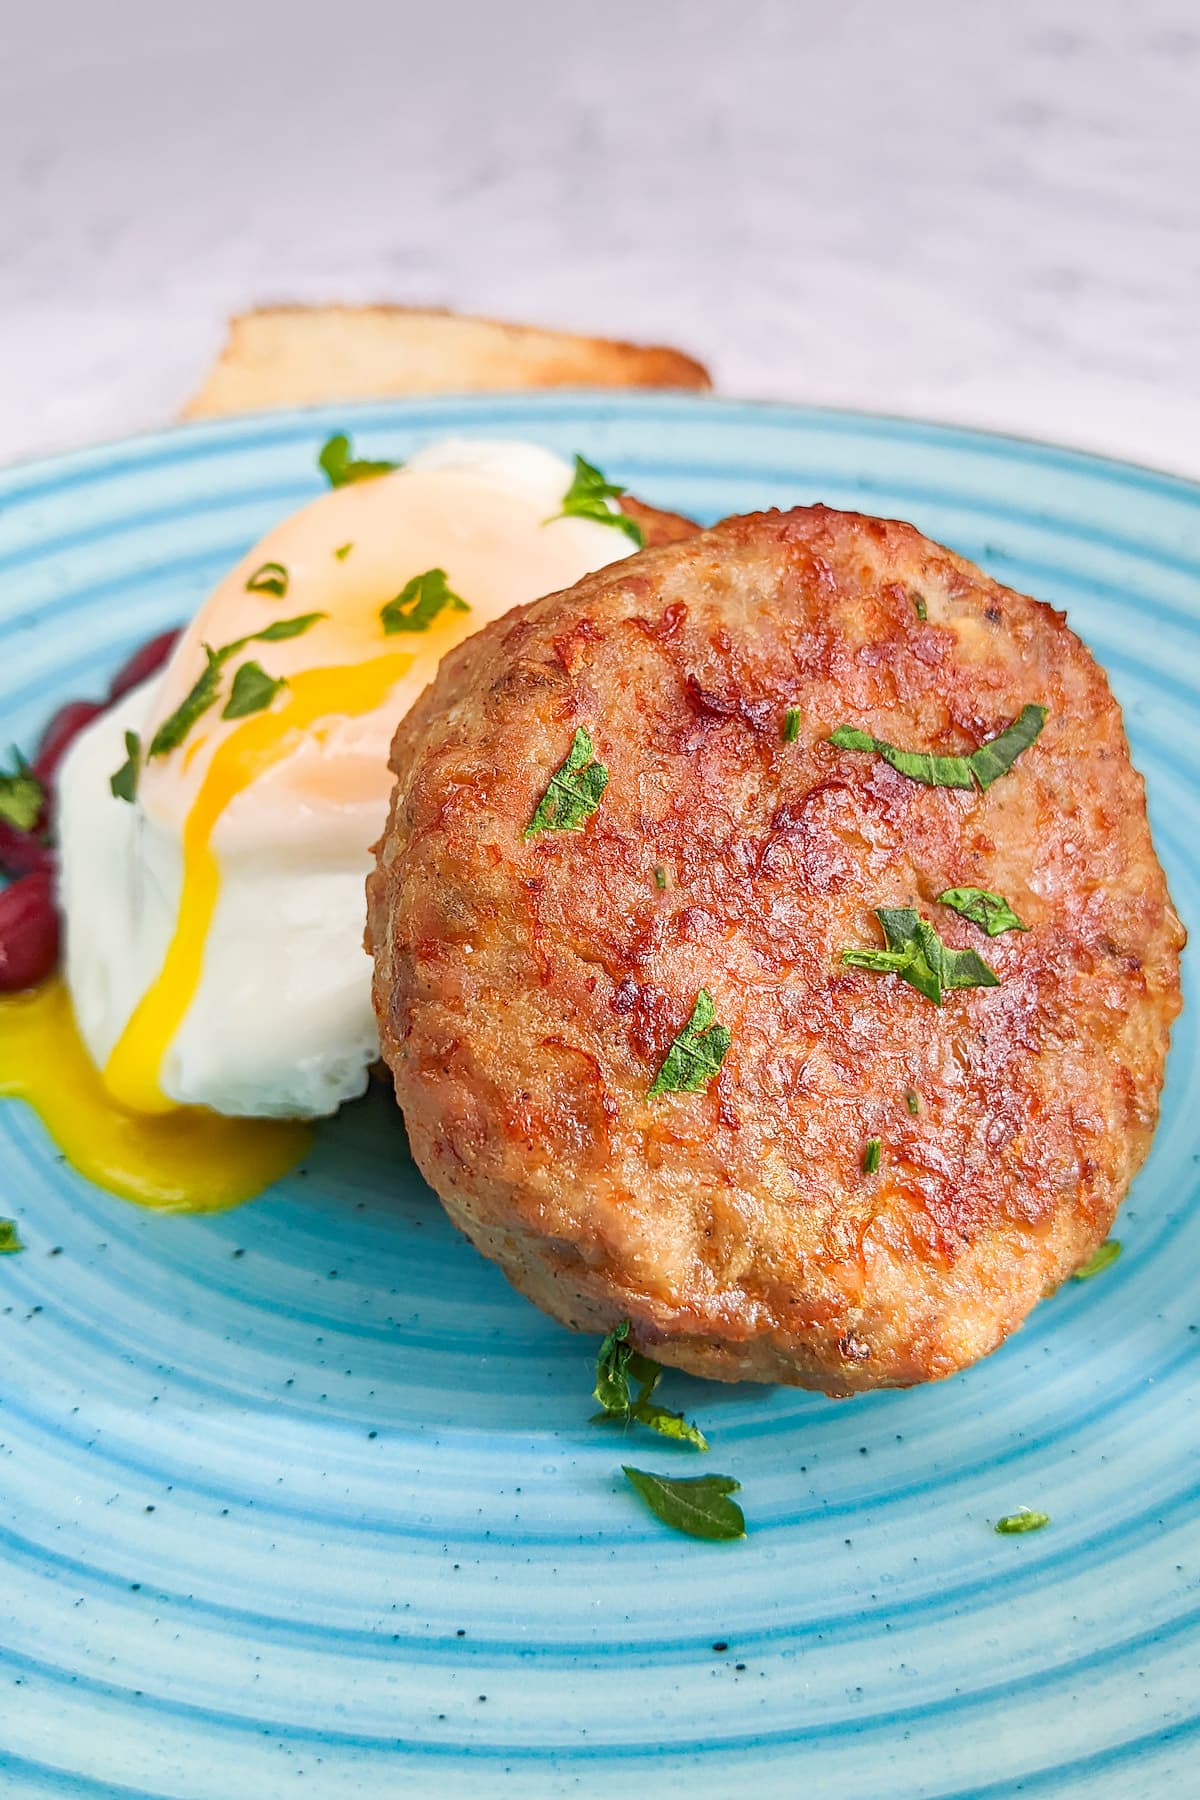 Air fried sausage patties with fried egg and chopped parsley on a blue plate.